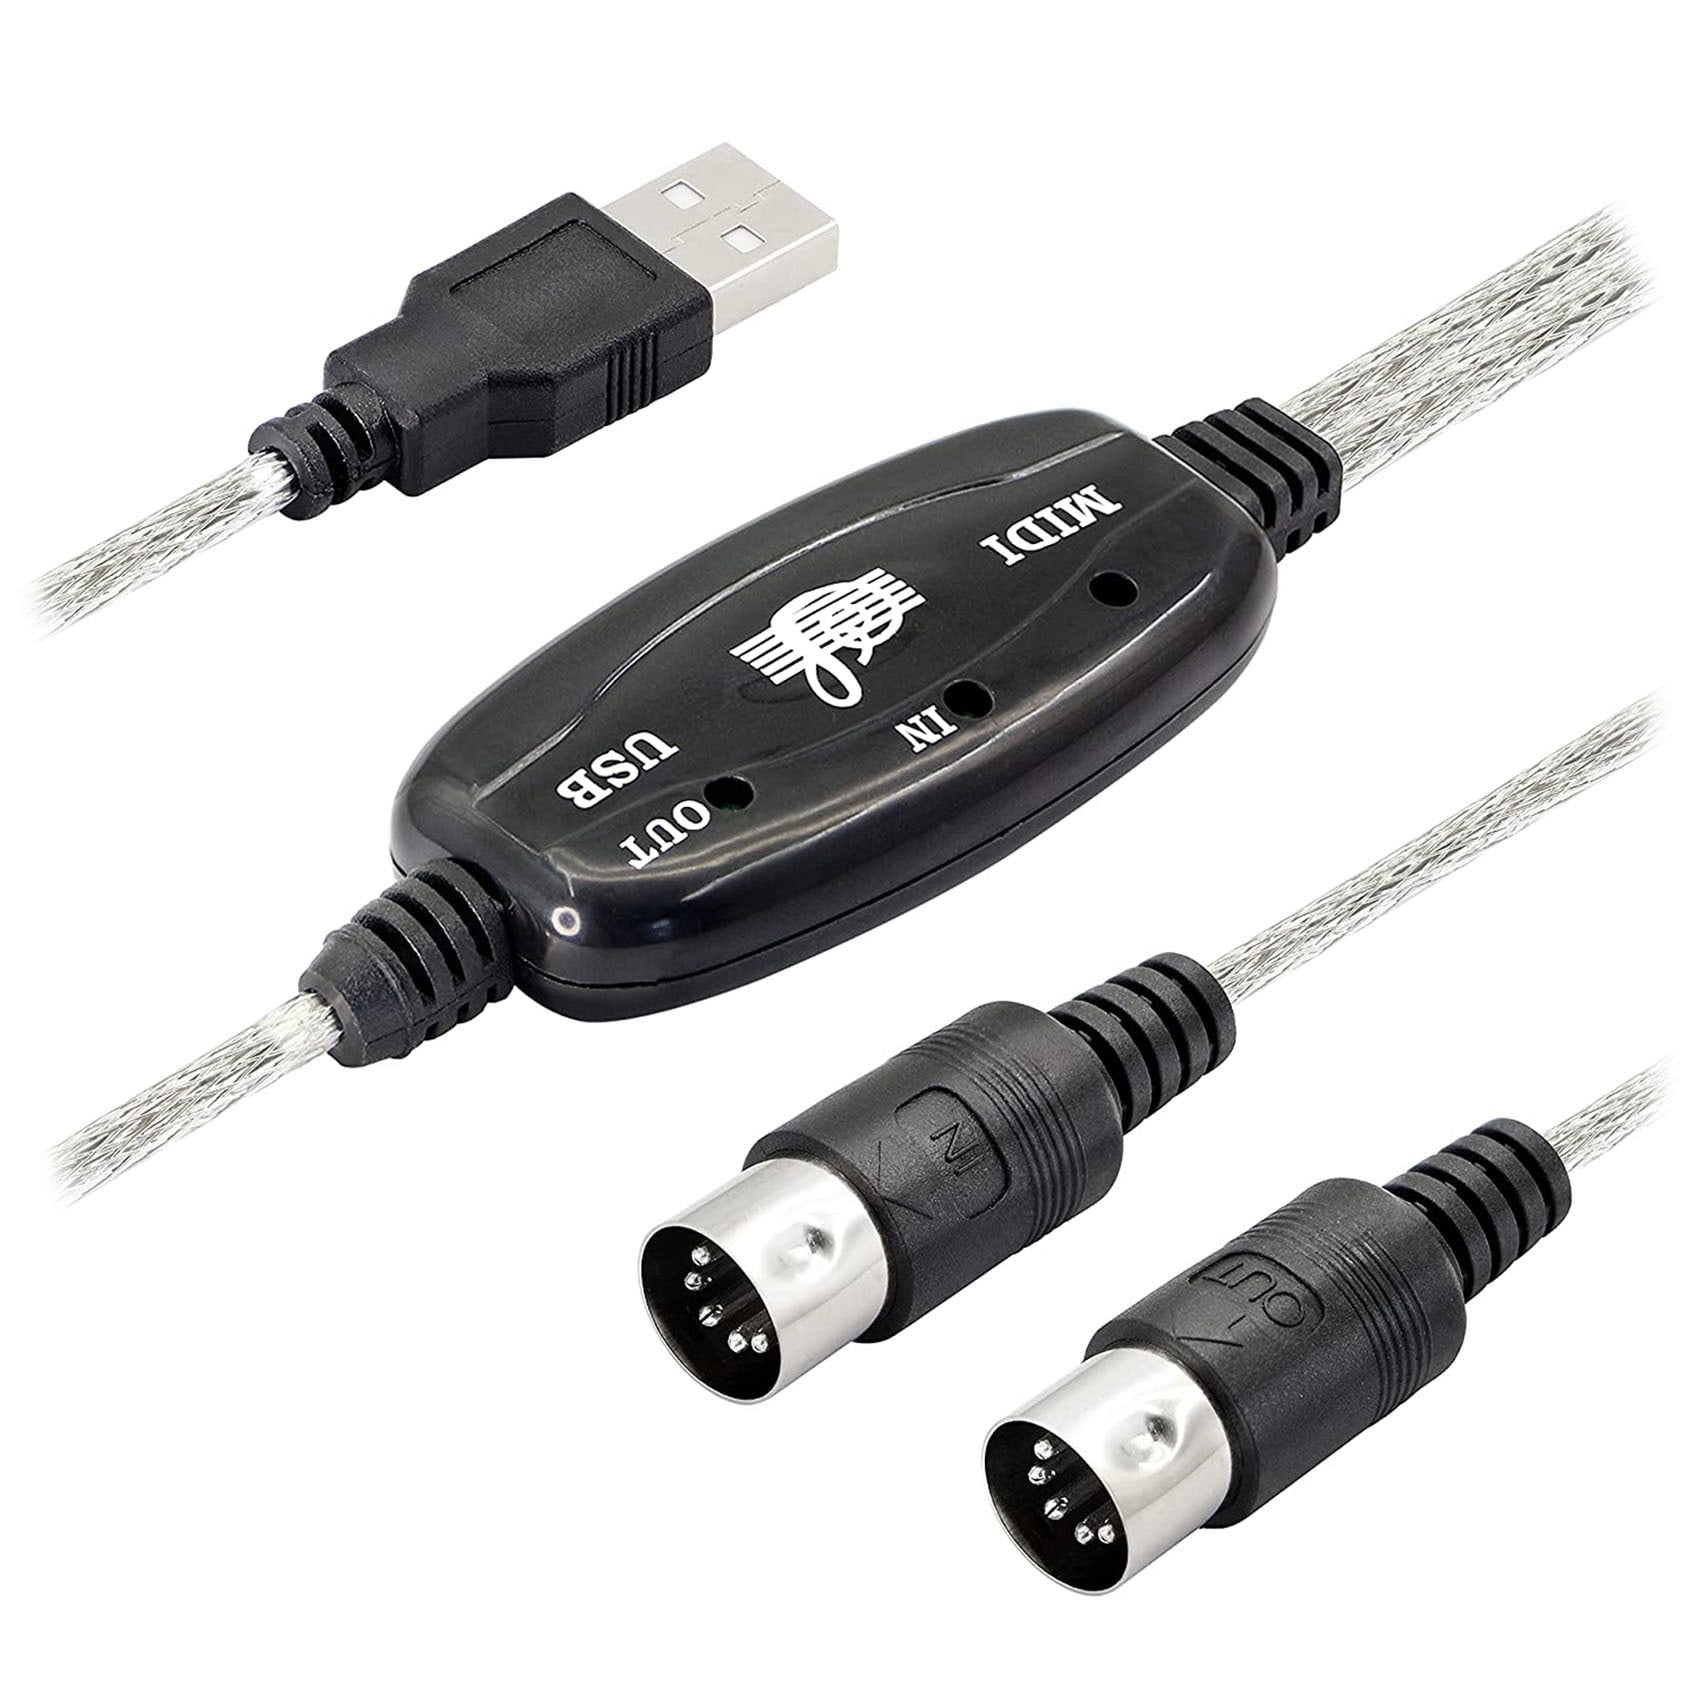 USB MIDI Cable Adapter USB Type A Male to MIDI Din 5 Pin In-Out Cable  Interface with LED Indicator for Music Keyboard